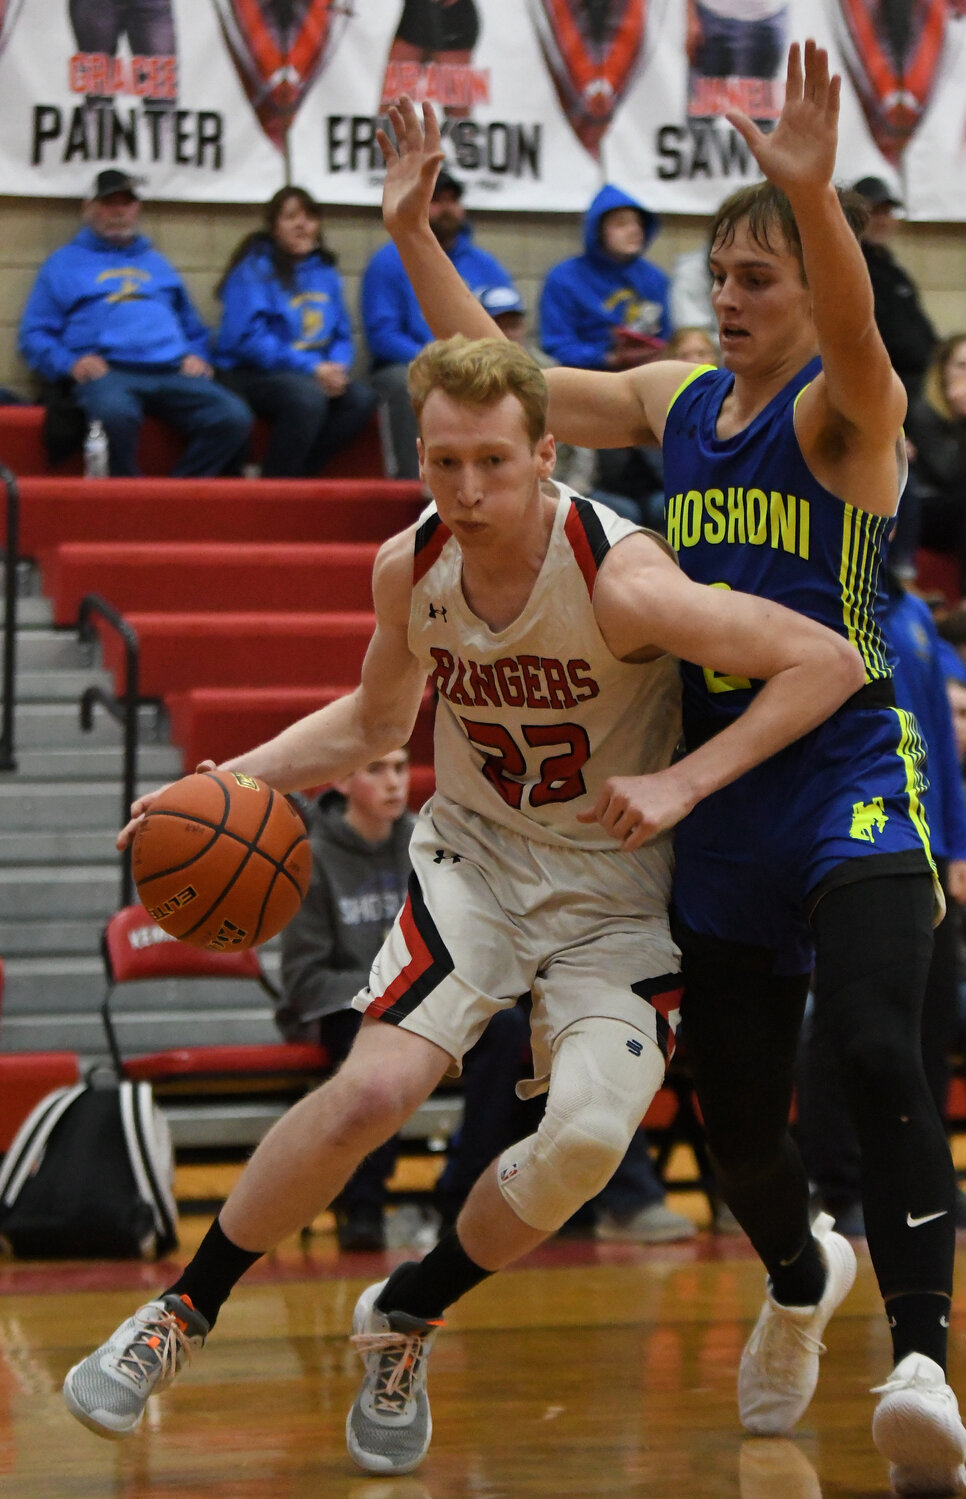 Ranger senior Skyler Rogers was a workhorse on the hardwood this season, earning his first 2A Southwest All-Conference selection. Rogers averaged 7.1 points and 6.4 rebounds per contest and was third on the team in total points, with 184.